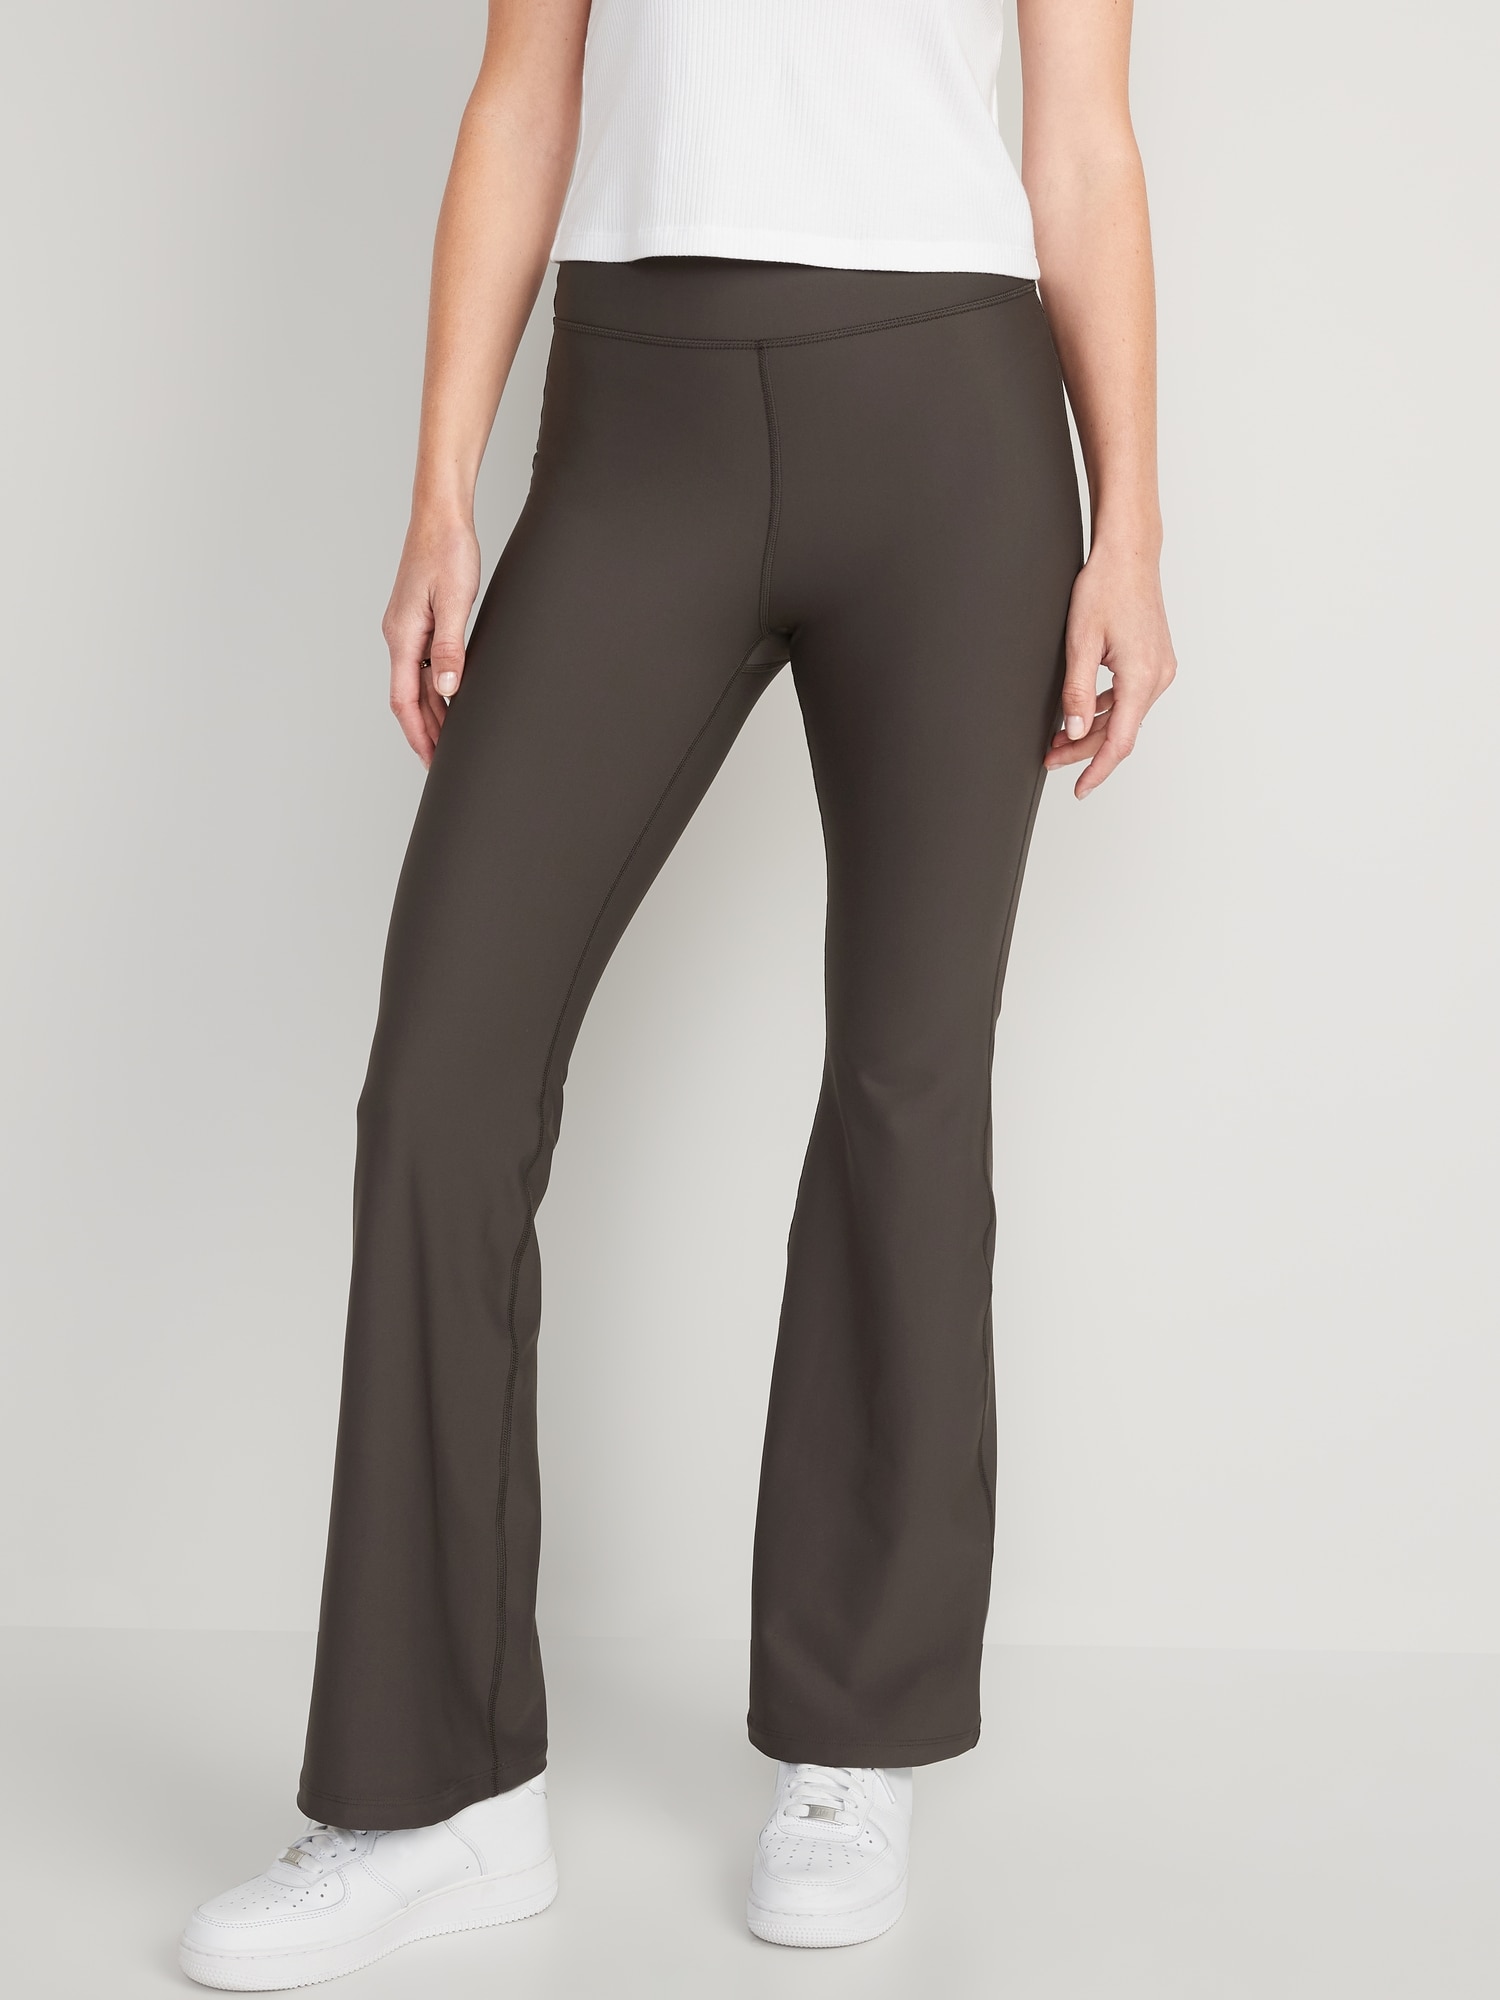 Old Navy Extra High-Waisted PowerSoft Flare Pants for Women